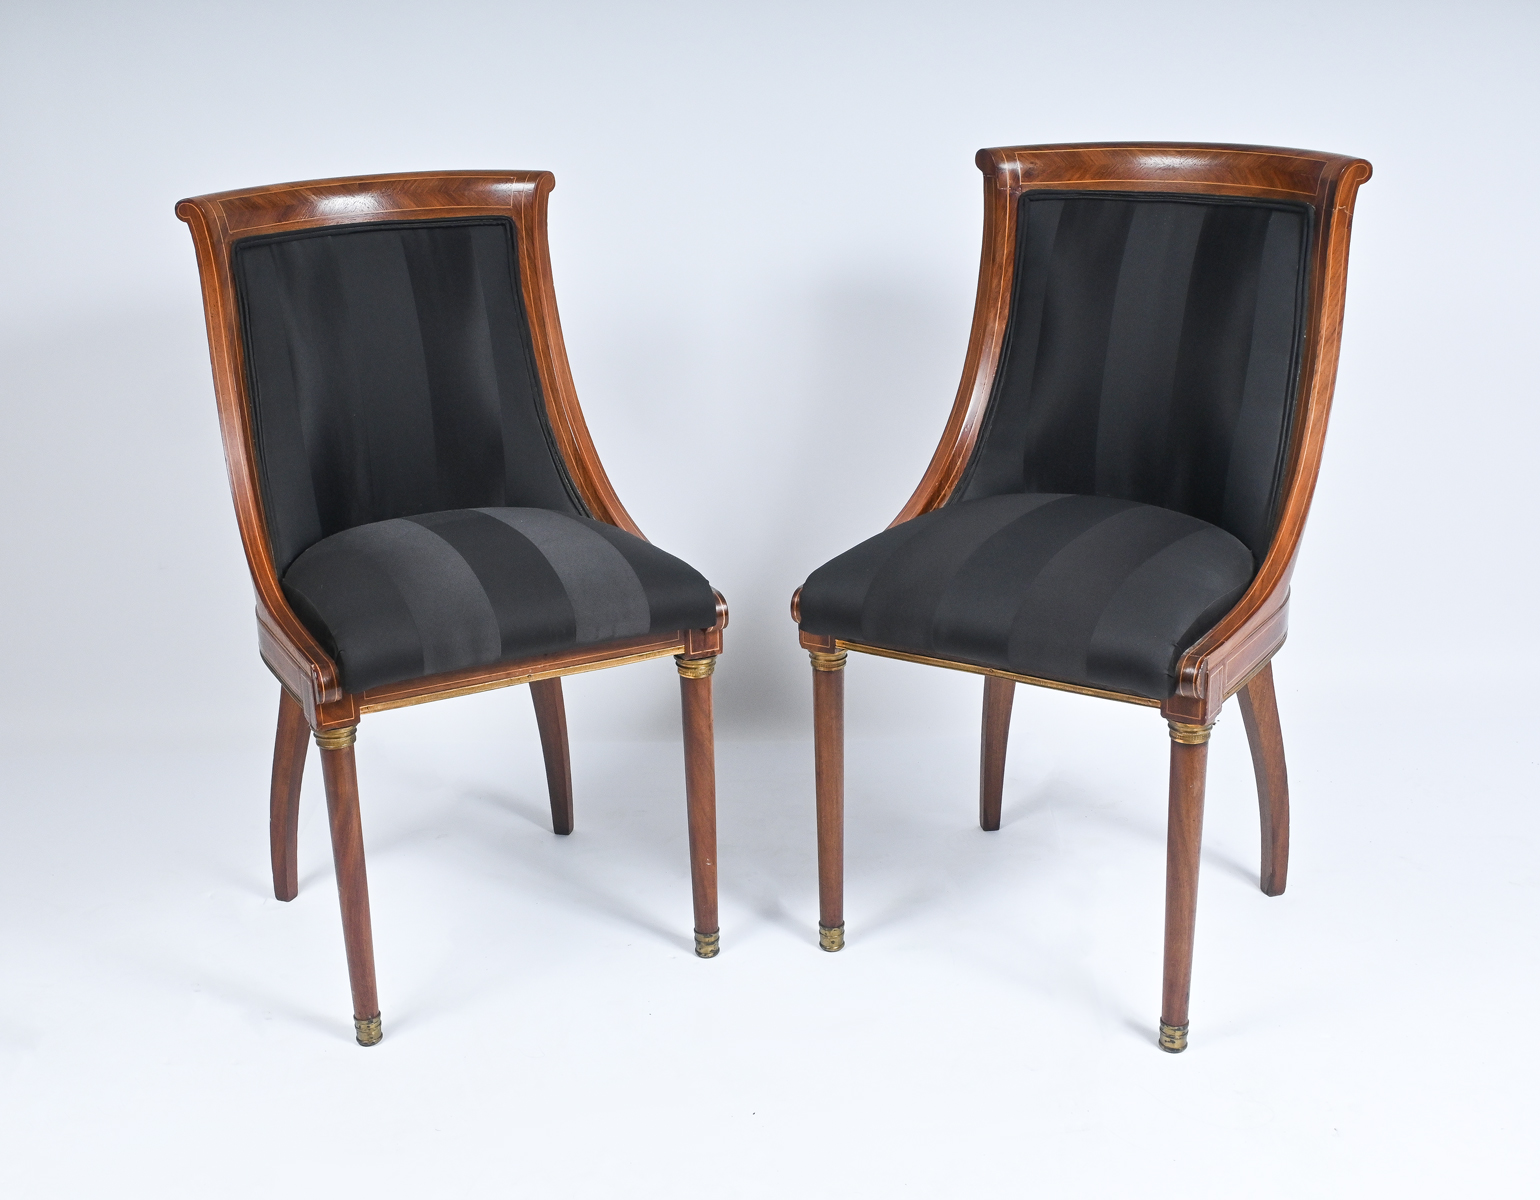 PAIR OF INLAID FRENCH DIRECTOIRE 369e39